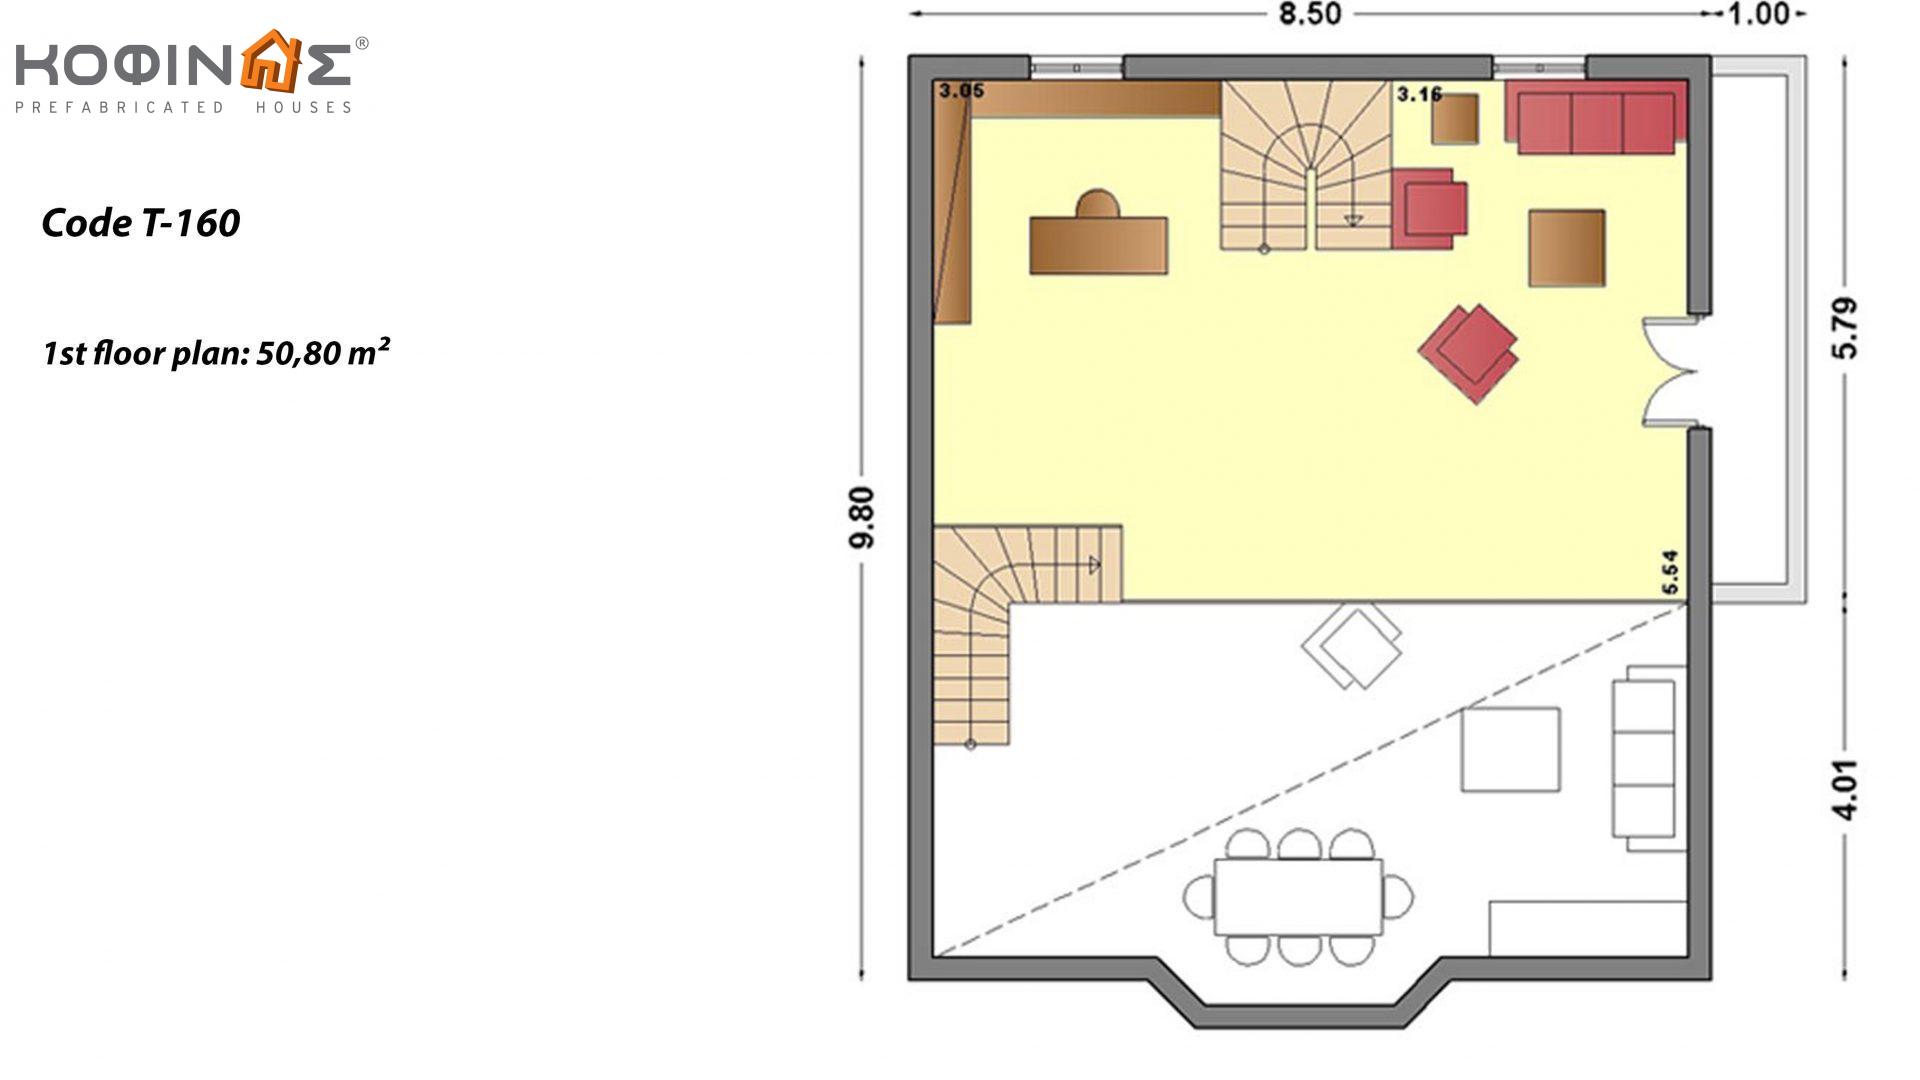 3-story house T-160, total surface of 160,90 m² ,covered areas 64.10 m²,balcony 10.20 m²